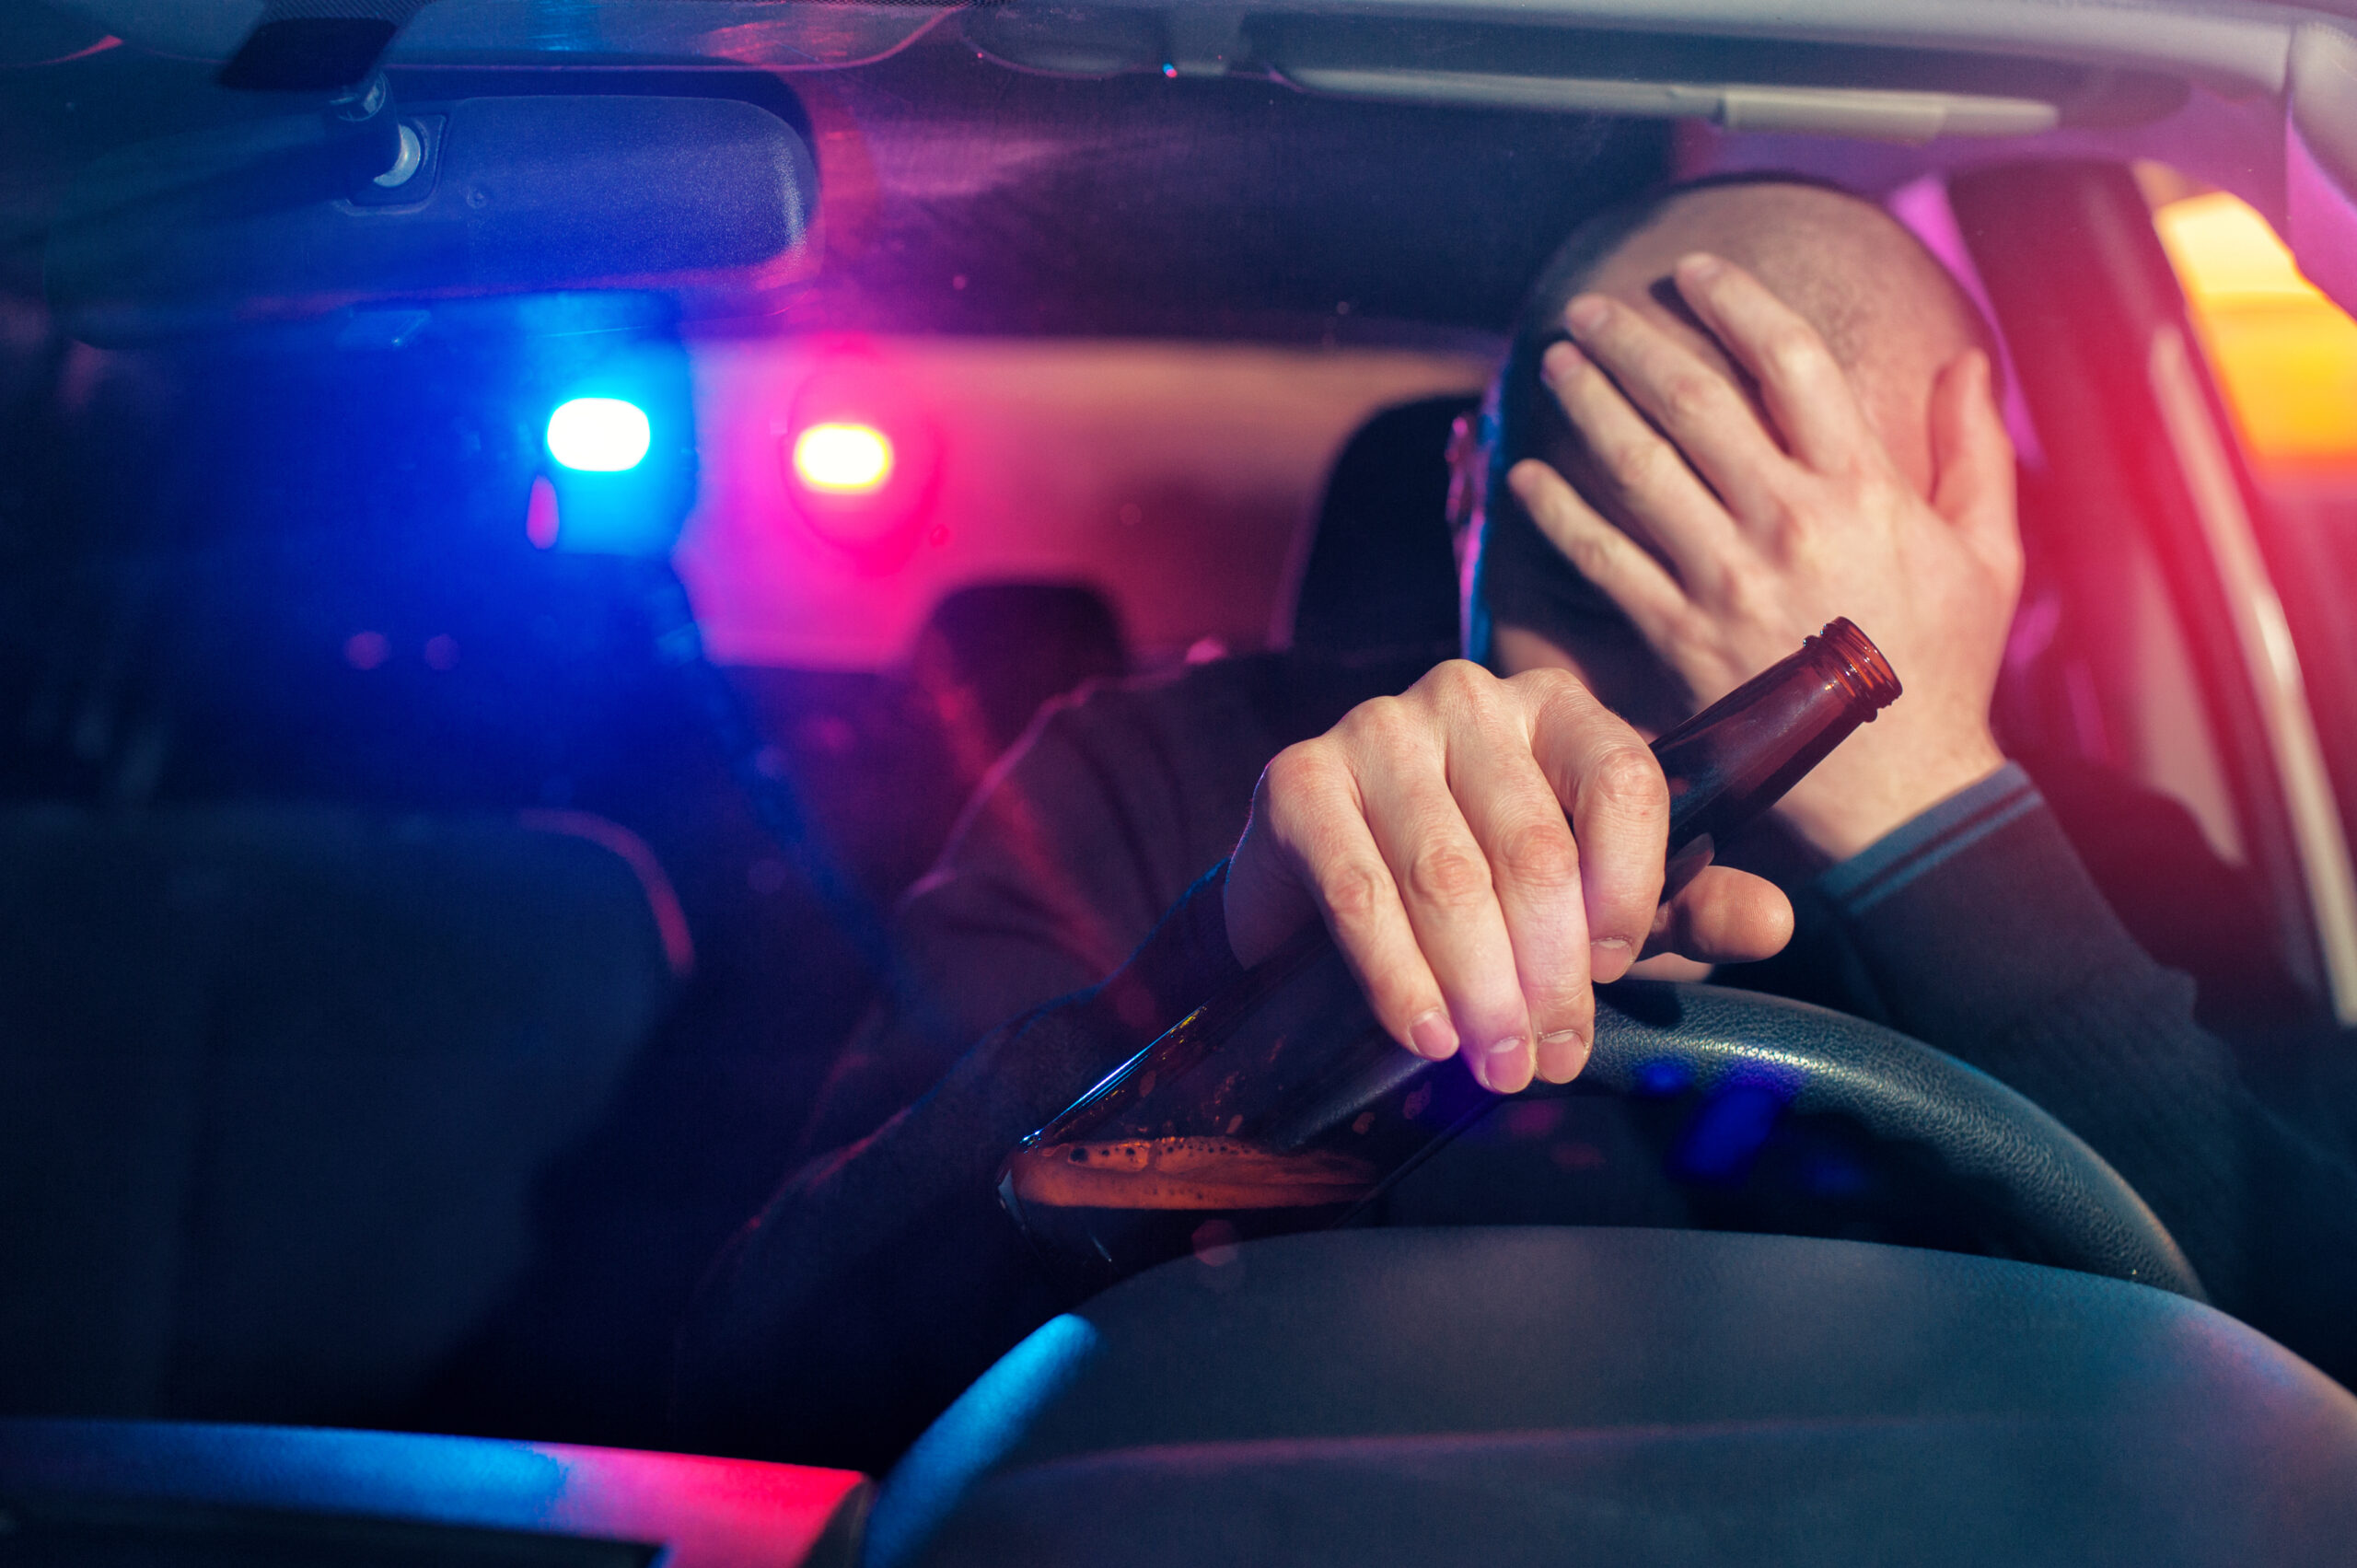 How to Tell if a Driver May Be Intoxicated